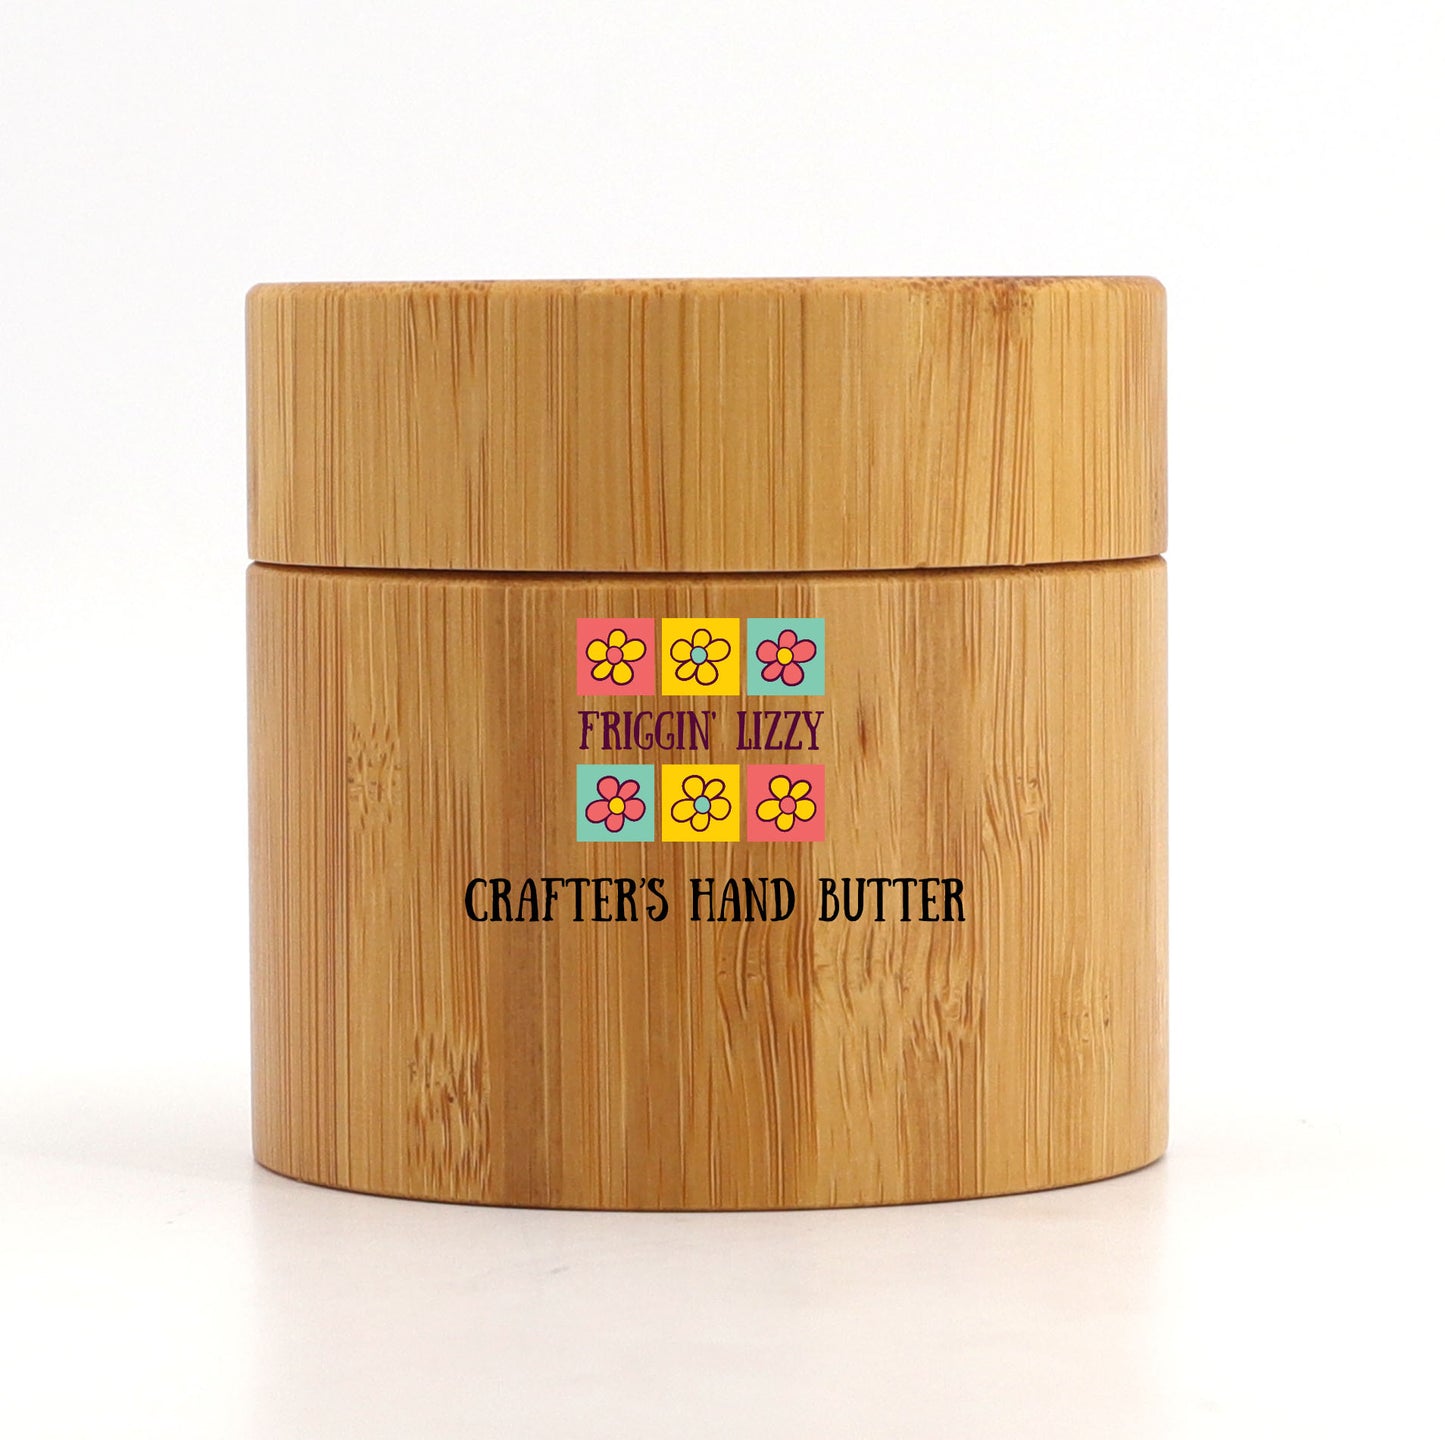 Friggin' Lizzy's Crafter's Hand Butter